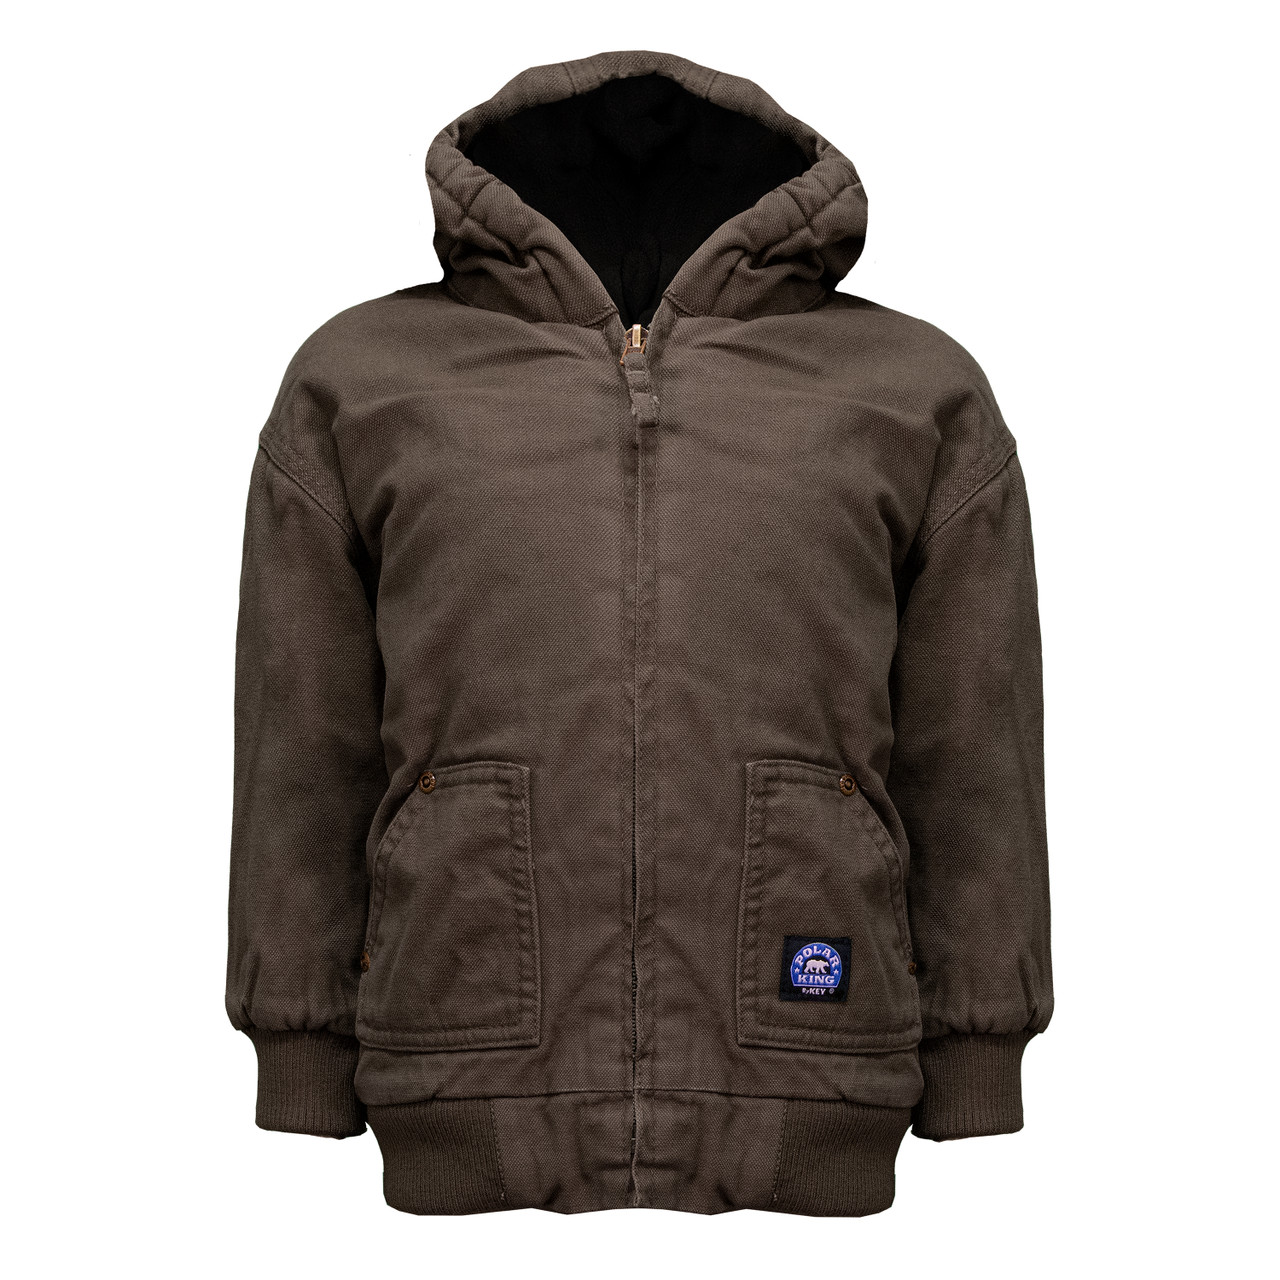 https://cdn11.bigcommerce.com/s-r4f6haoaux/images/stencil/1280x1280/products/252/650/youth-insulated-fleece-lined-hooded-jacket-bark-Polar-King-359-27-front__14420.1695675299.jpg?c=1